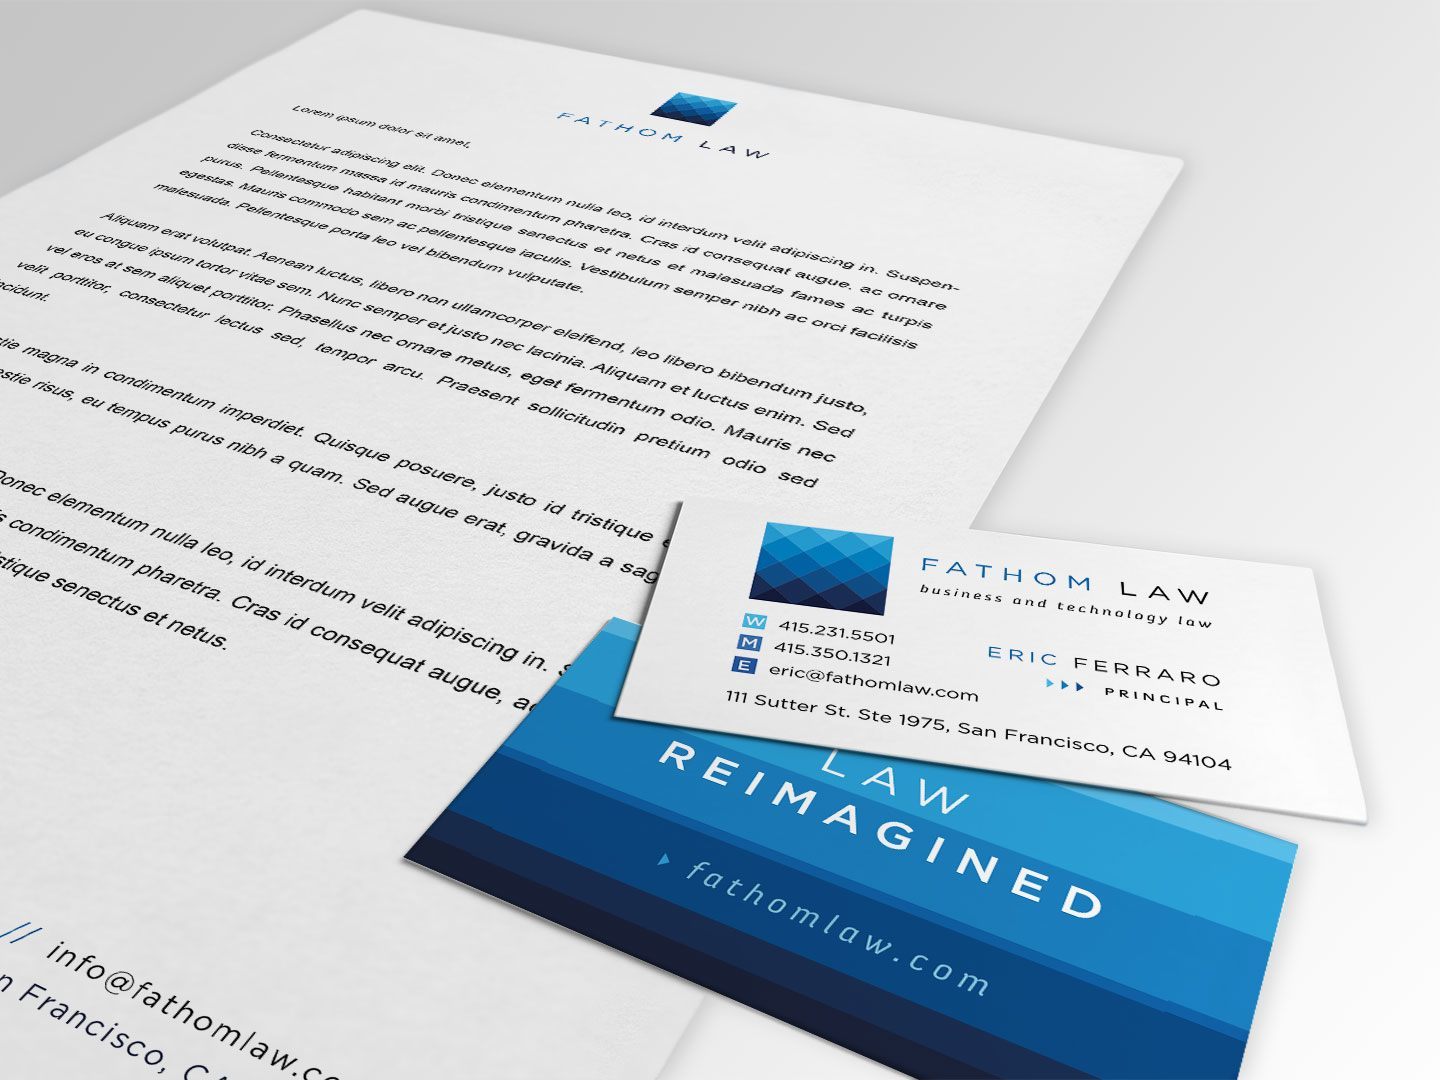 Fathom Law Letterhead and Business Cards